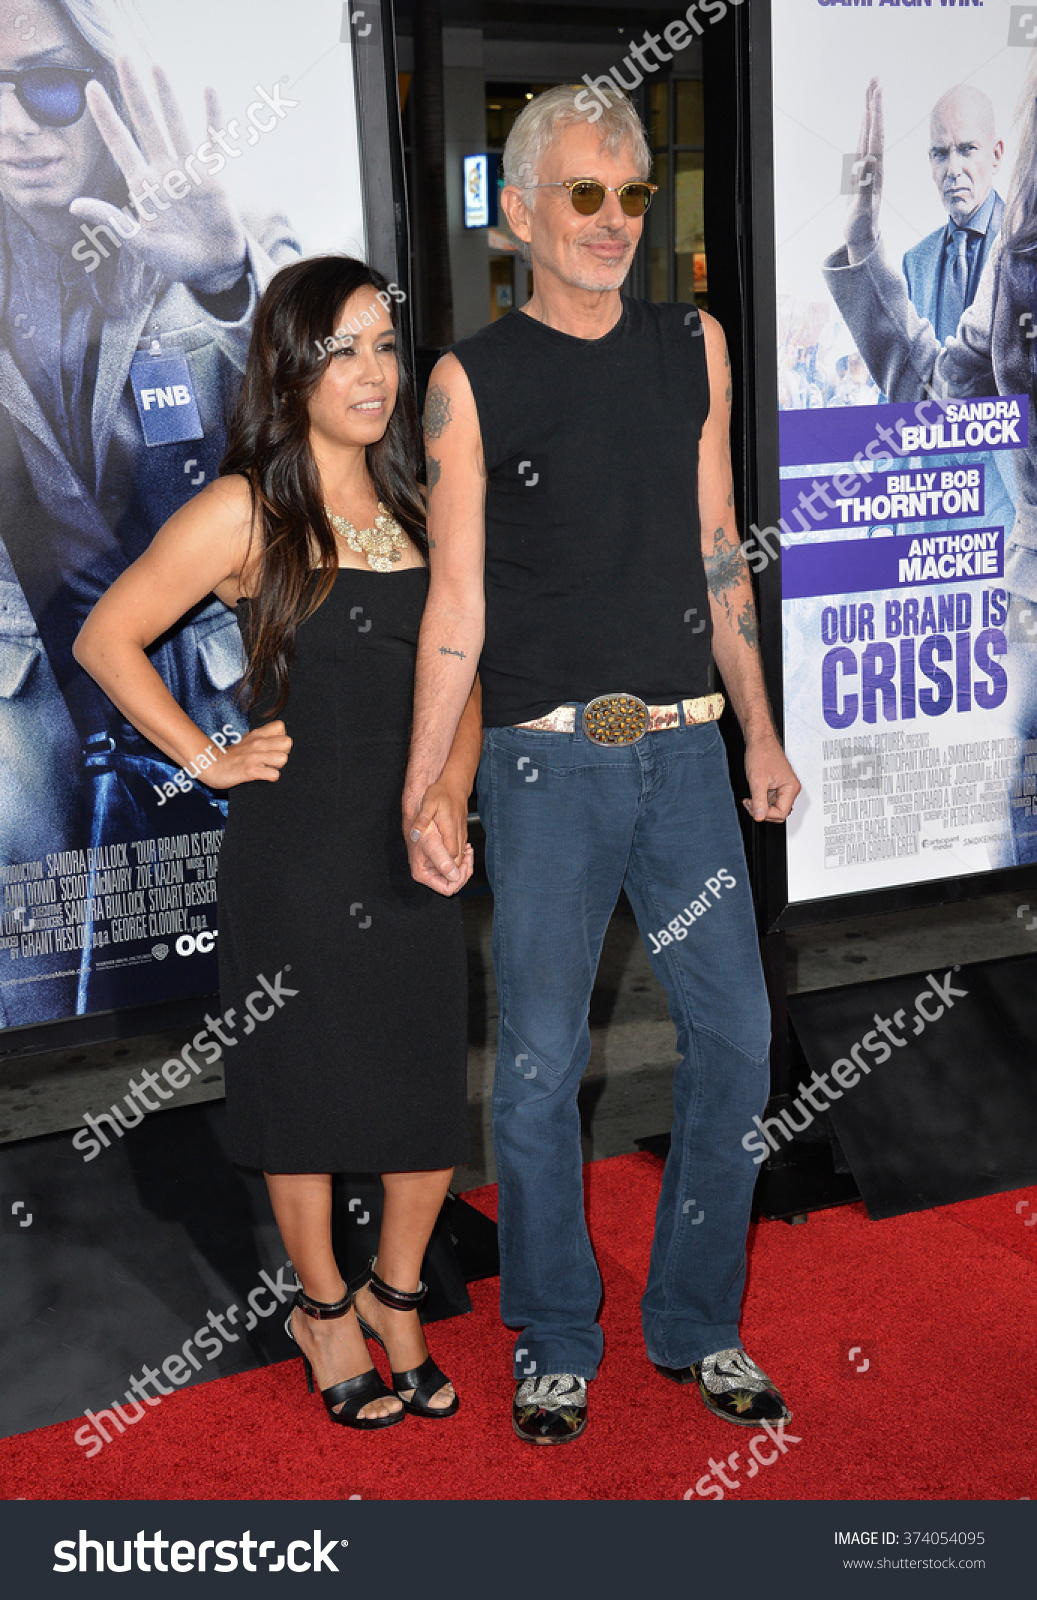 Billy Bob Thornton Wife Connie Angland At The Los Angeles Premiere Of His Movie